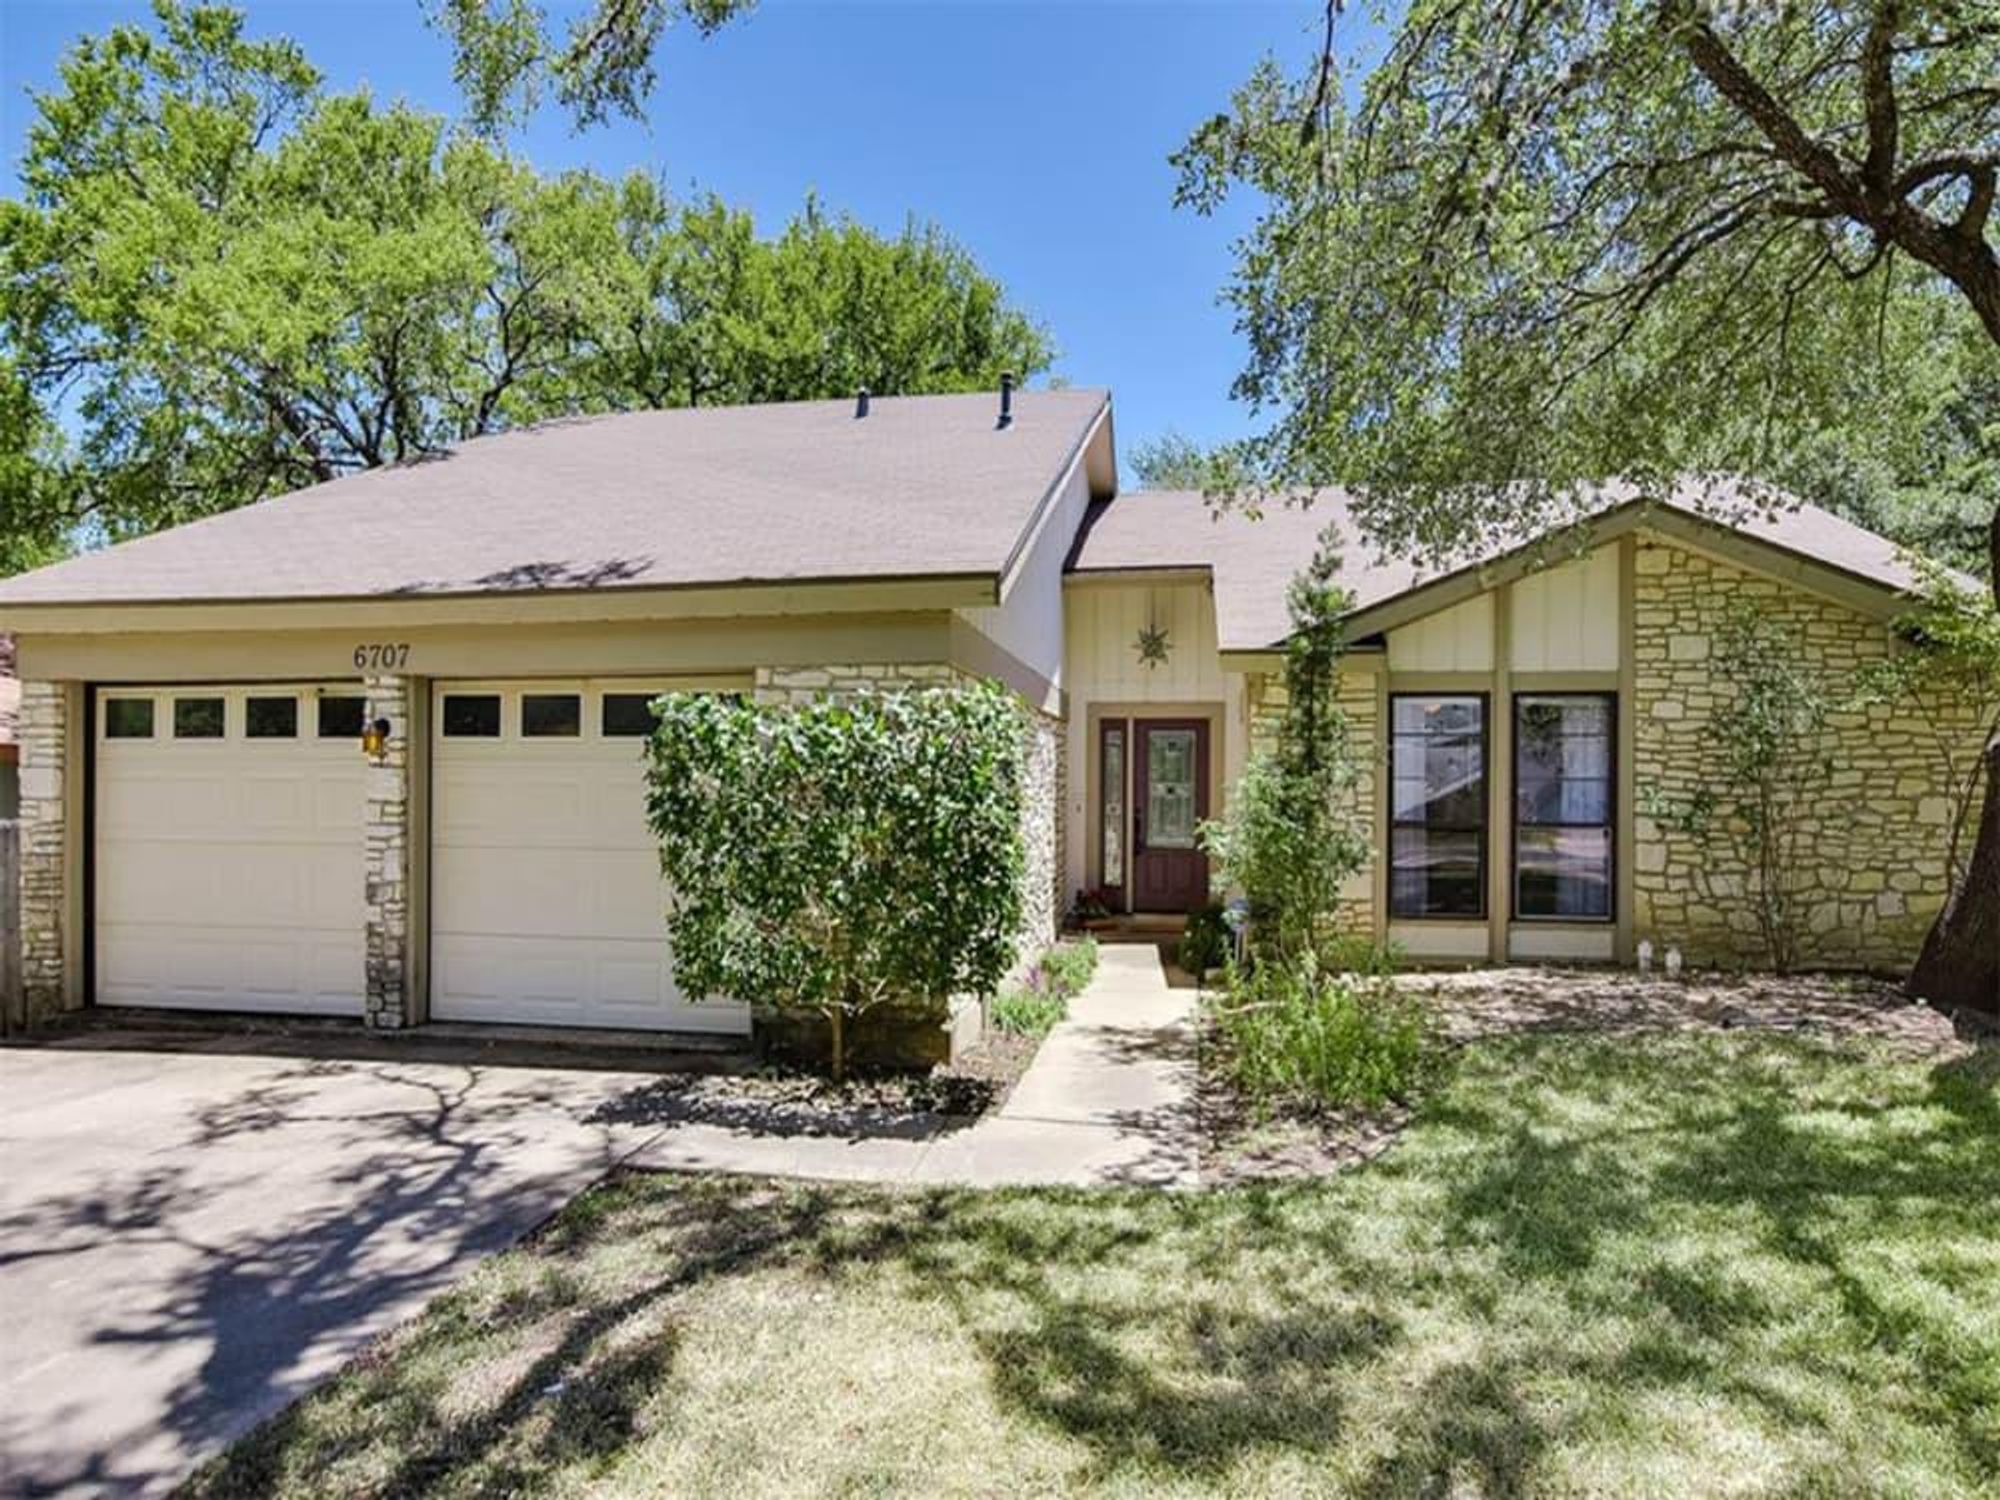 South Austin home for sale